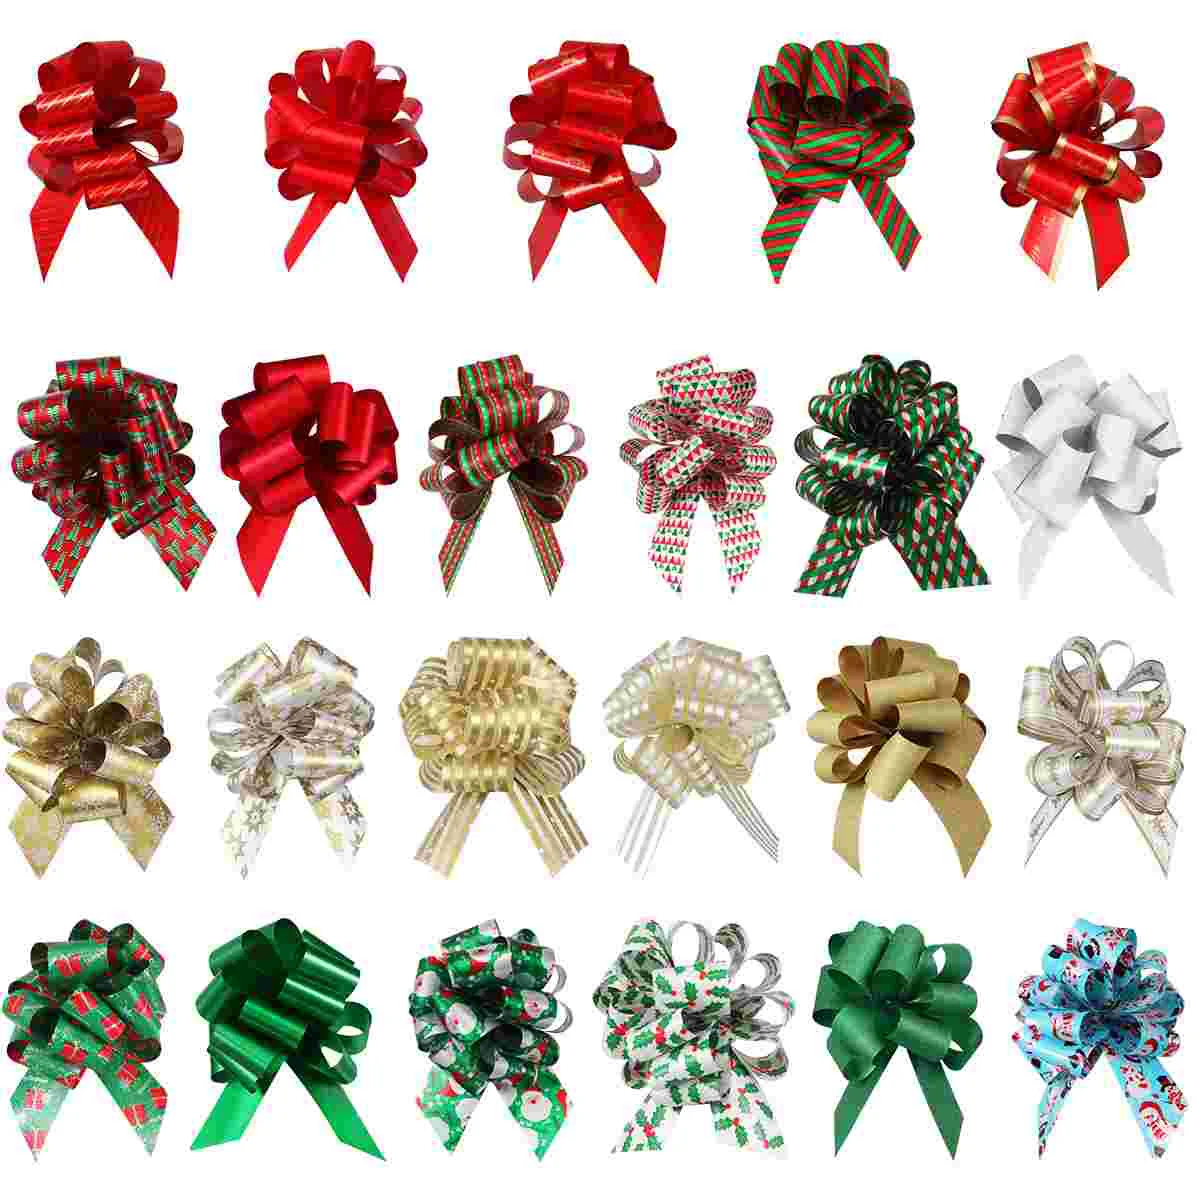 

24 Pieces Christmas Wrap Bows, Assorted Present Bows for Christmas Wedding Valentines Day Present Gifts Wrapping Baskets